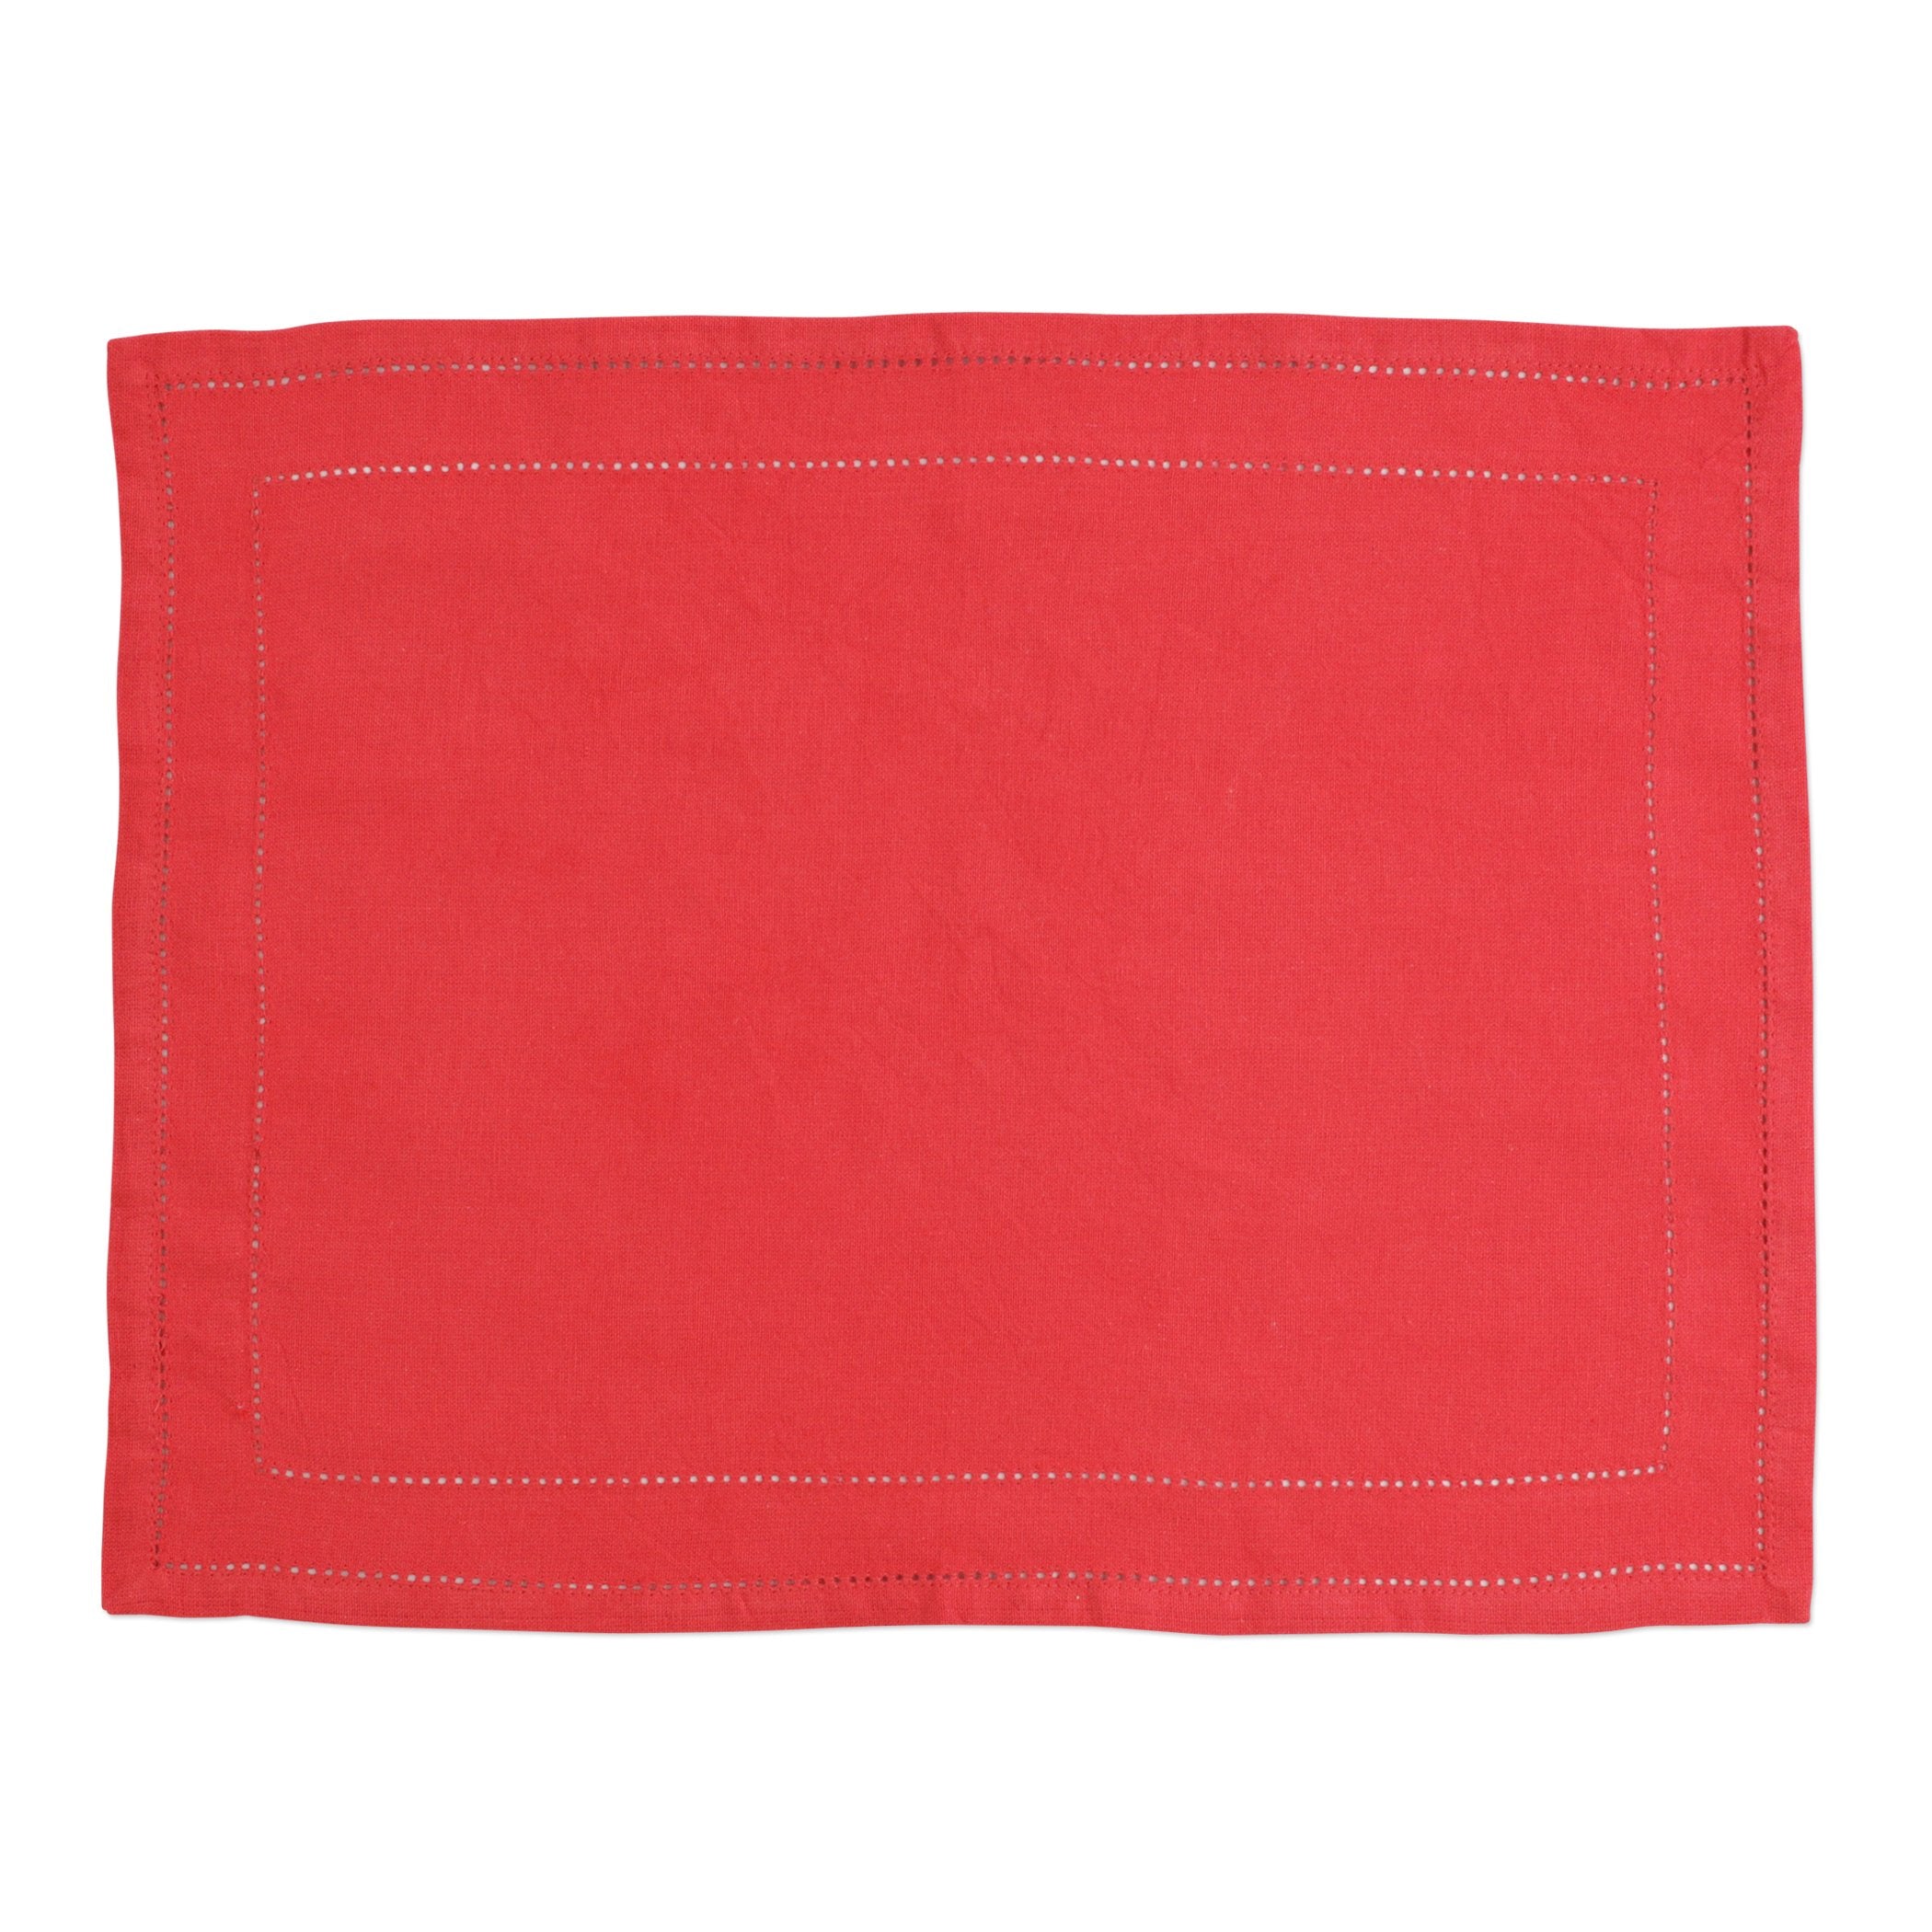 Cotone Linens Red Placemats with Double Stitching - Set of 4